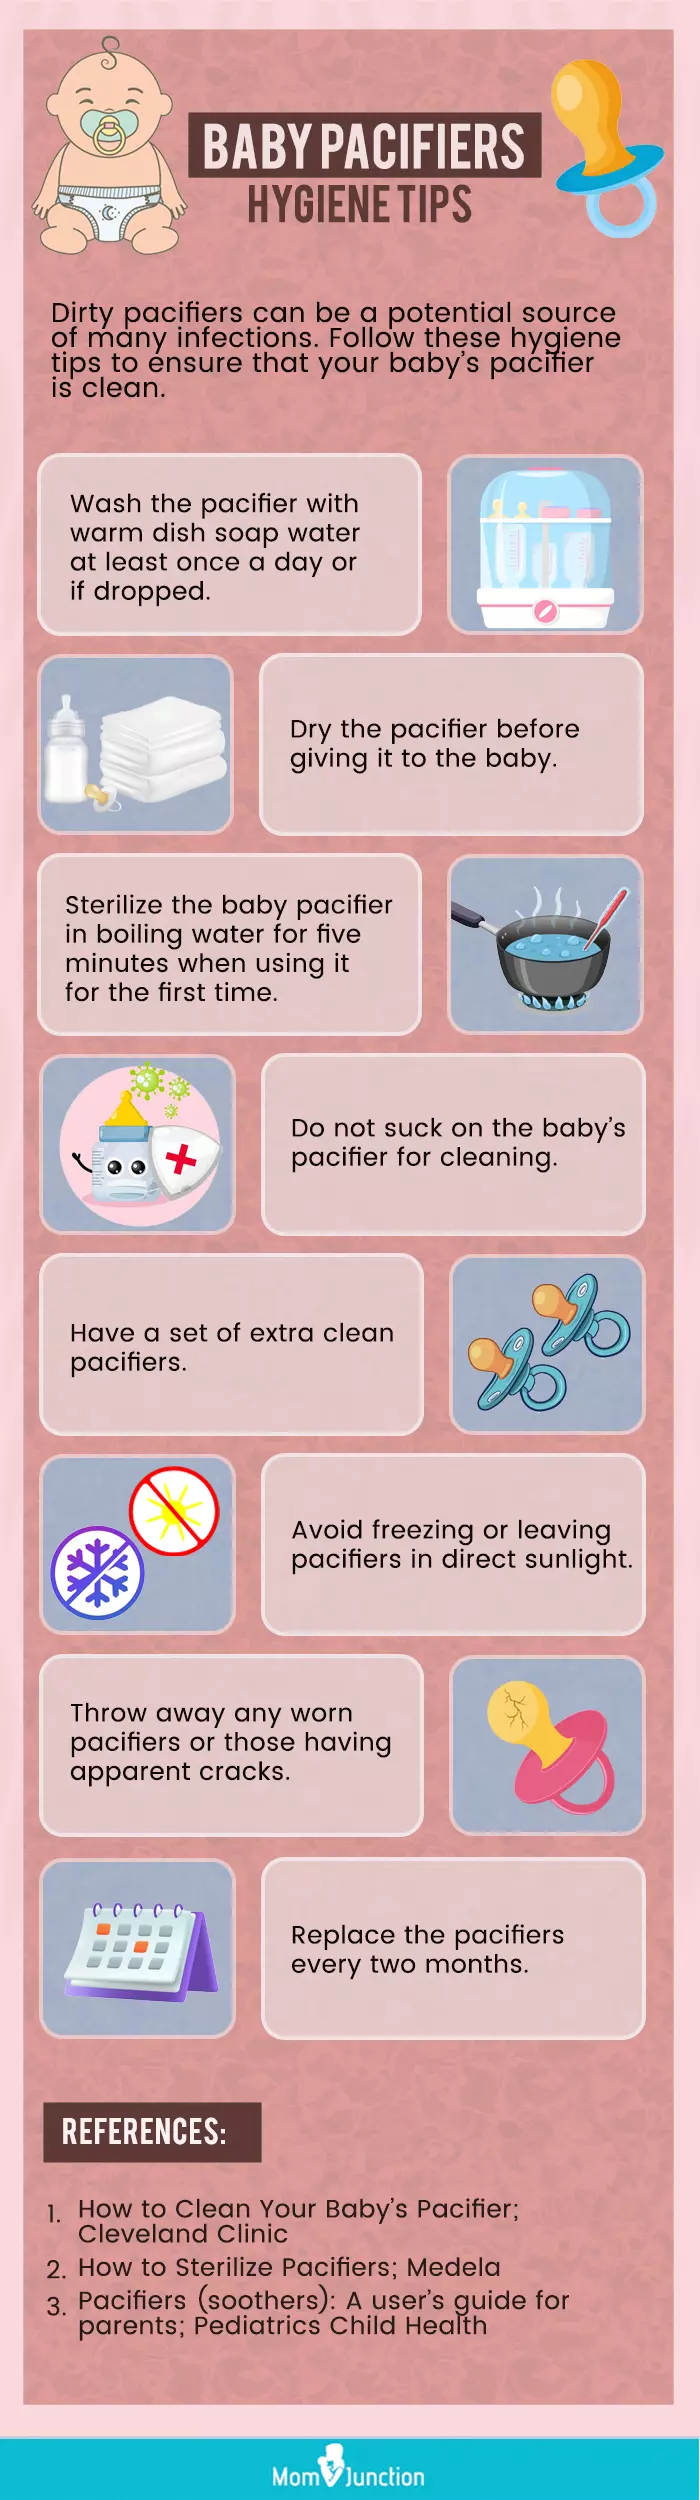 baby pacifiers hygiene tips (infographic)